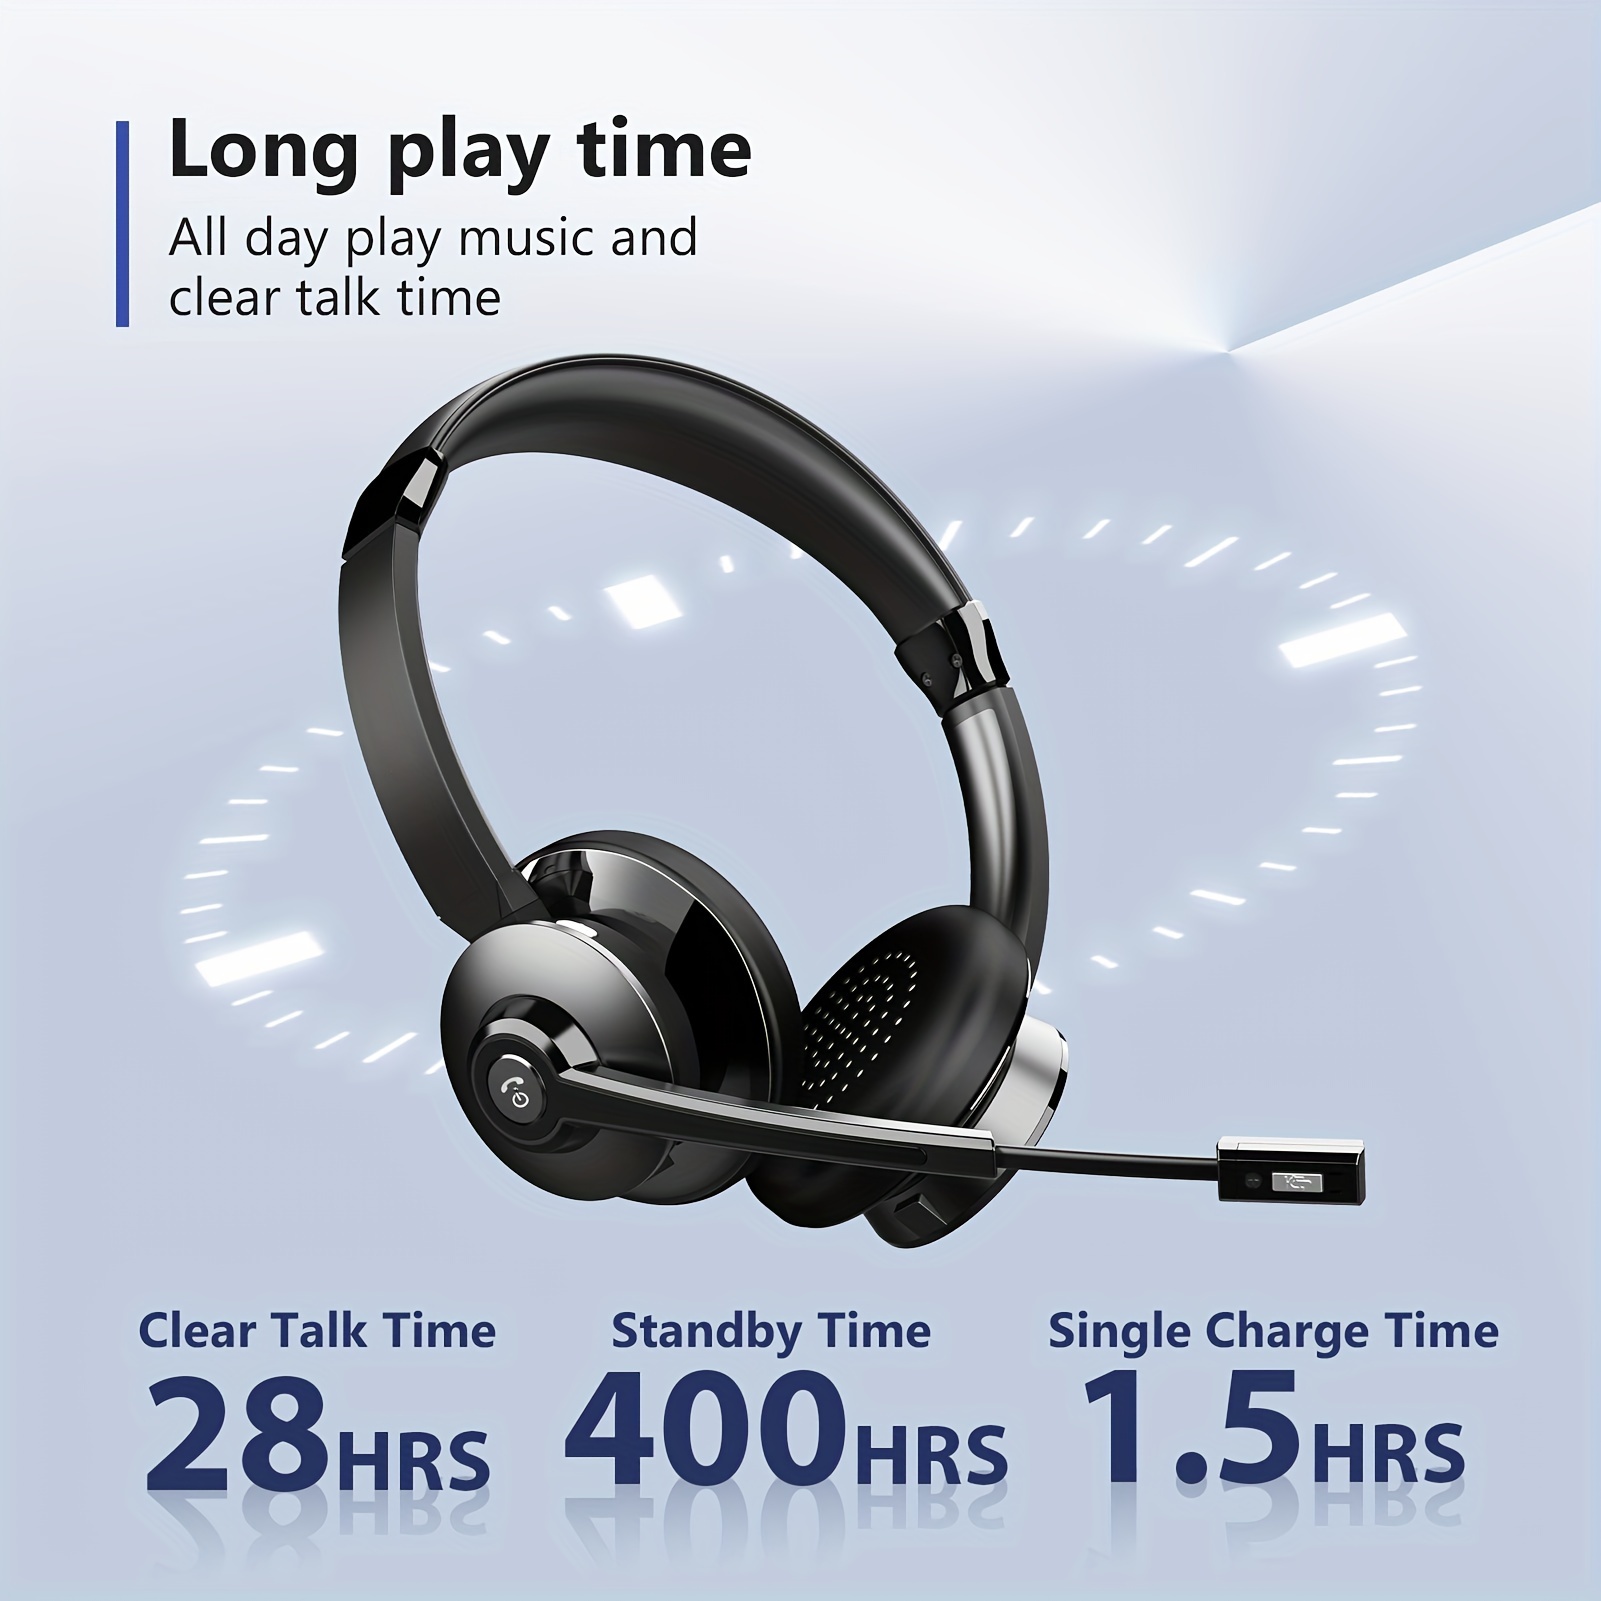 

Wireless Headset With Ai Noise Canceling, Bt Headset With Microphone, V5.0 On Ear Headphone With Usb Dongle & Mute Button Handsfree 26hrs For Pc/laptop/smart Phone